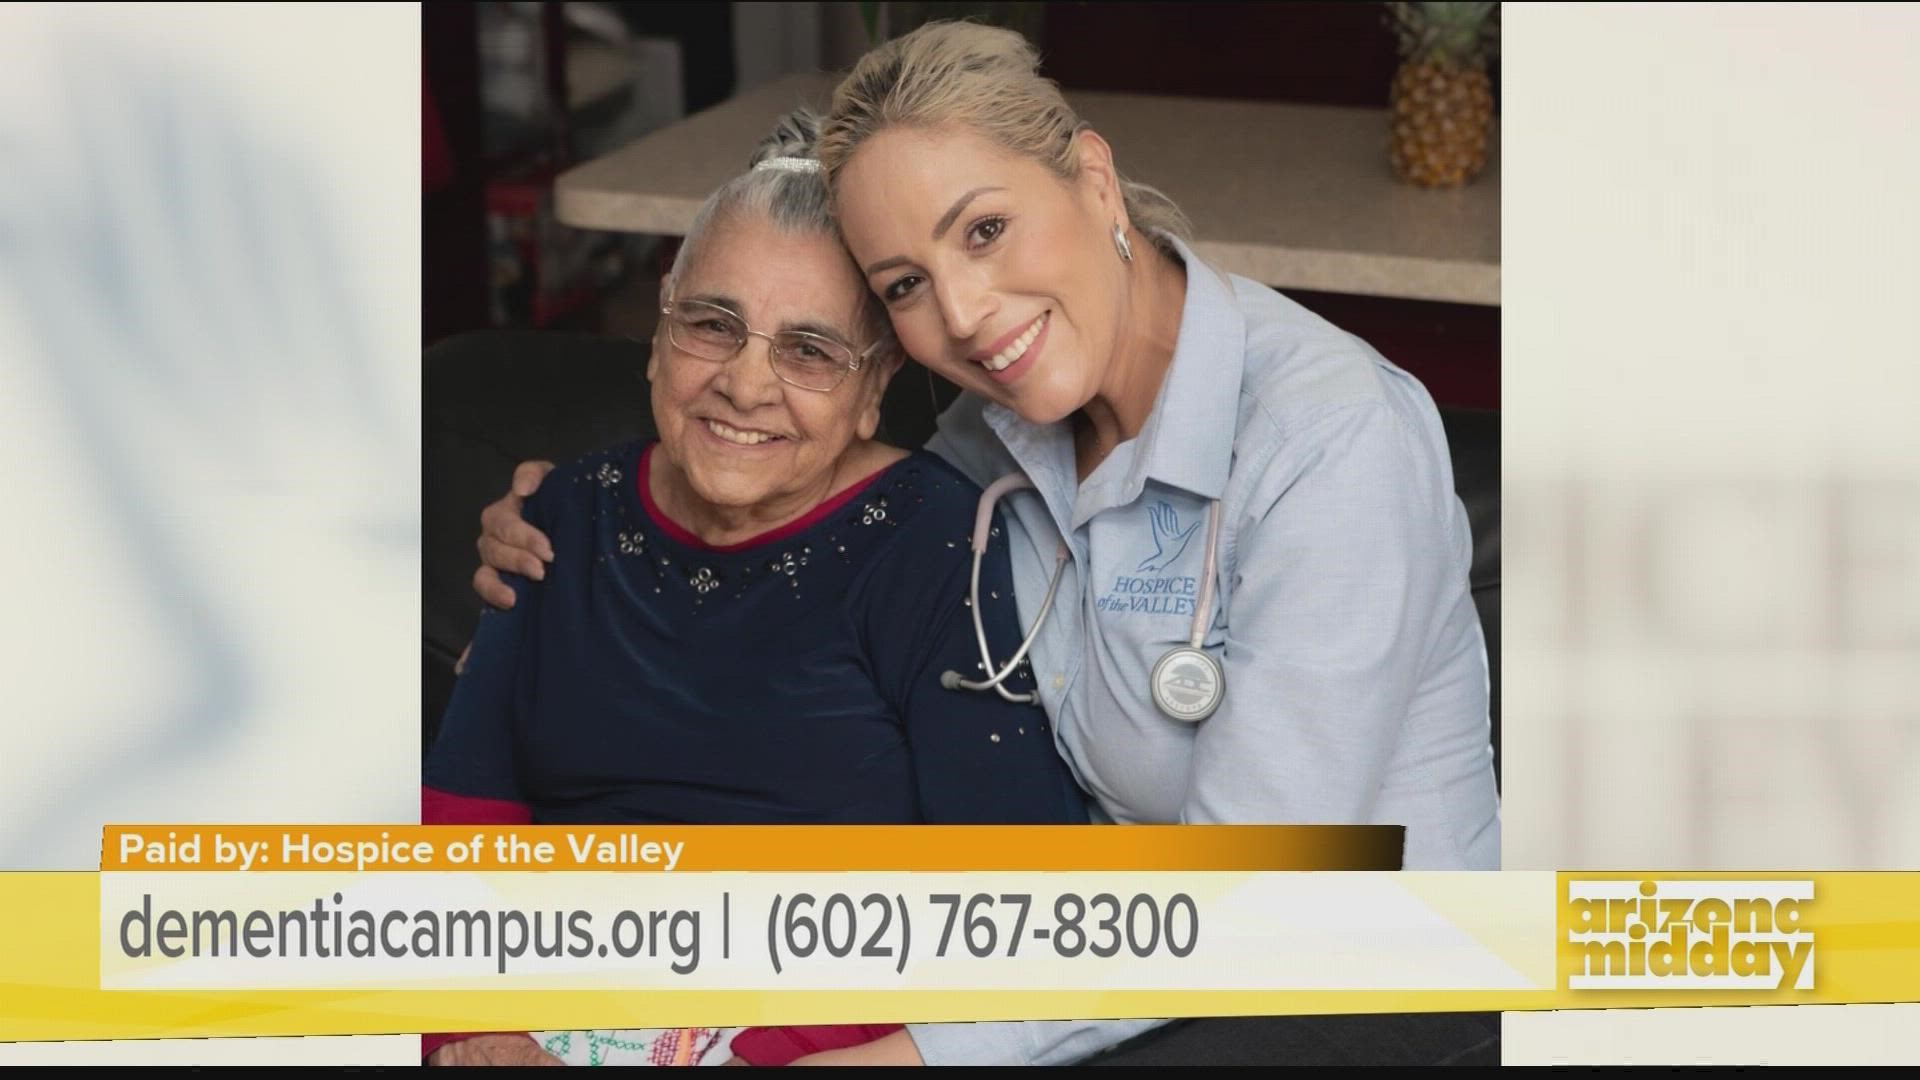 Debbie Shumway with Hospice of the Valley shares how the new campus helps families in our community enhance quality of life for loved ones living with dementia